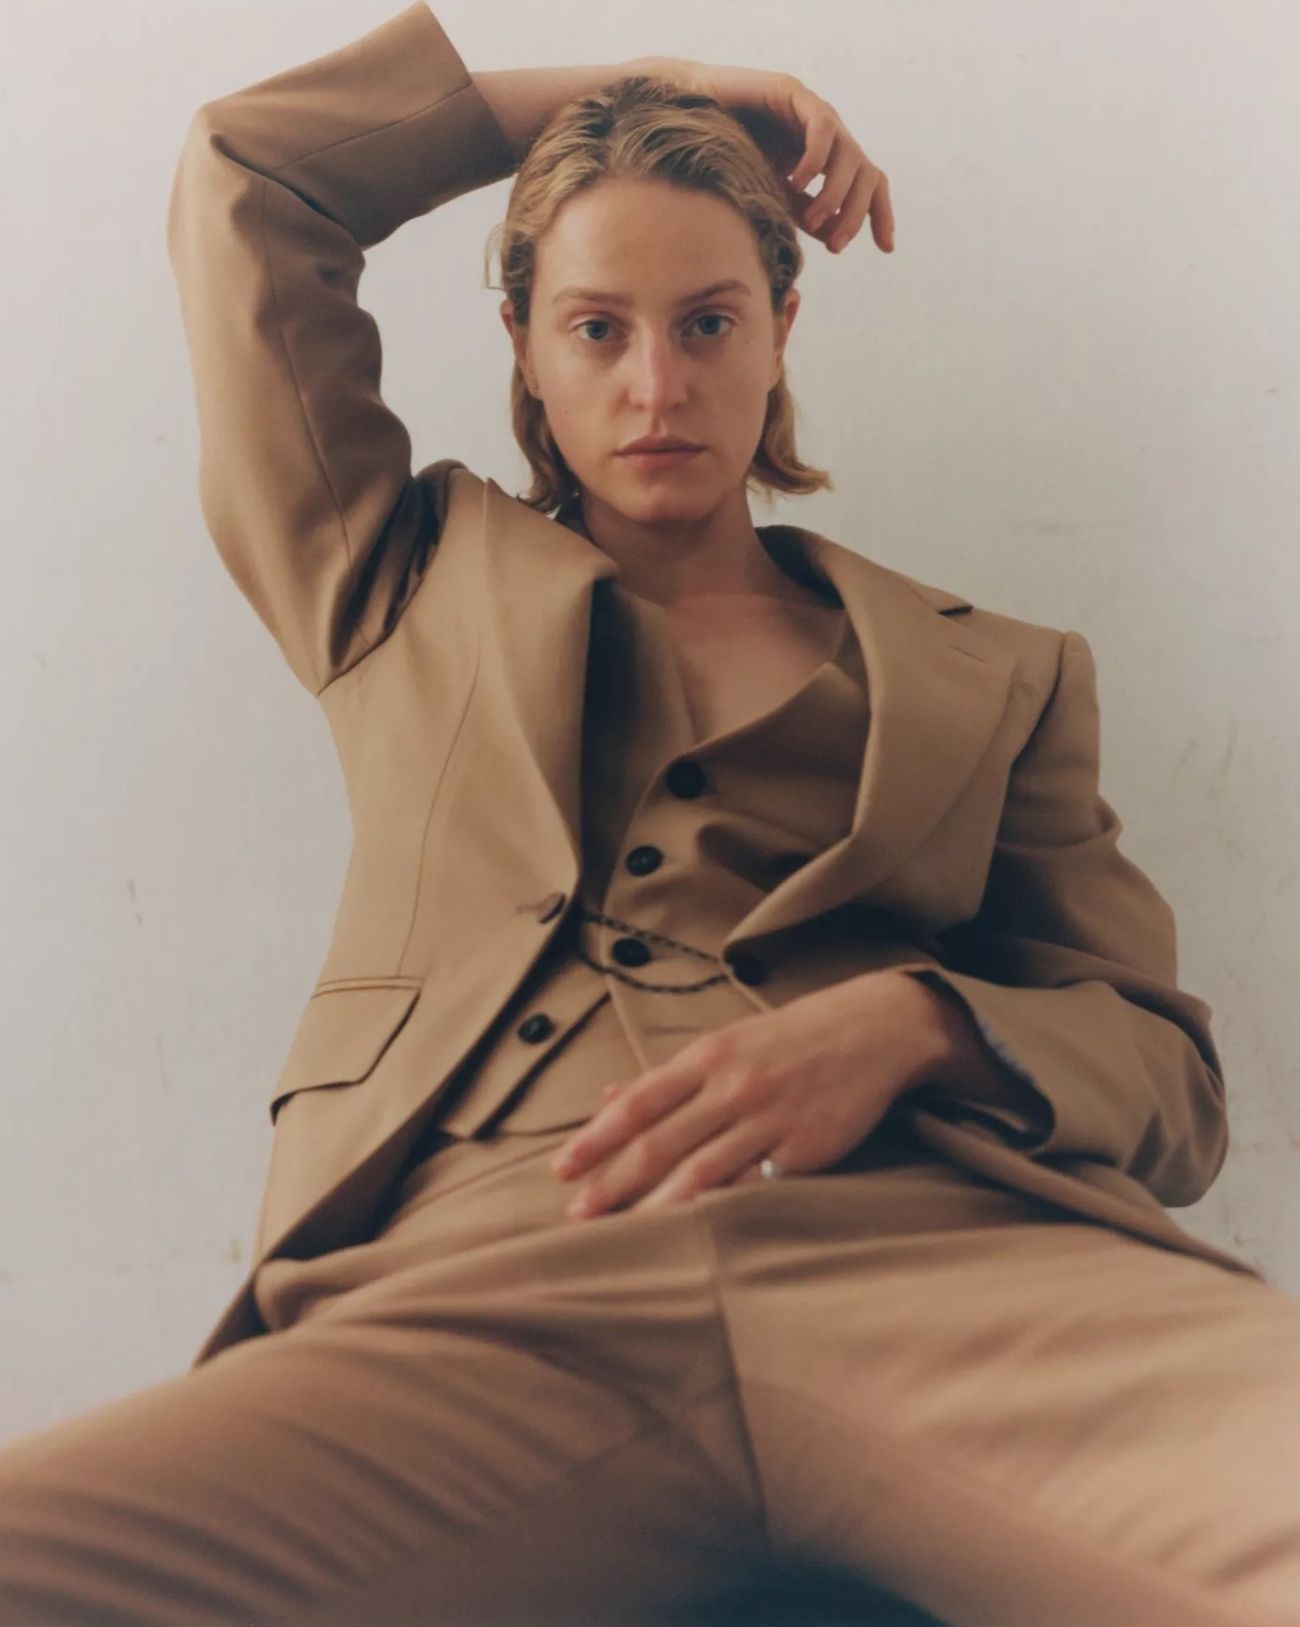 Daria Polunina by Lukasz Pukowiec for Vogue Ukraine March 2019. Clothing: Wool jacket and wool trousers by Vivienne Westwood 